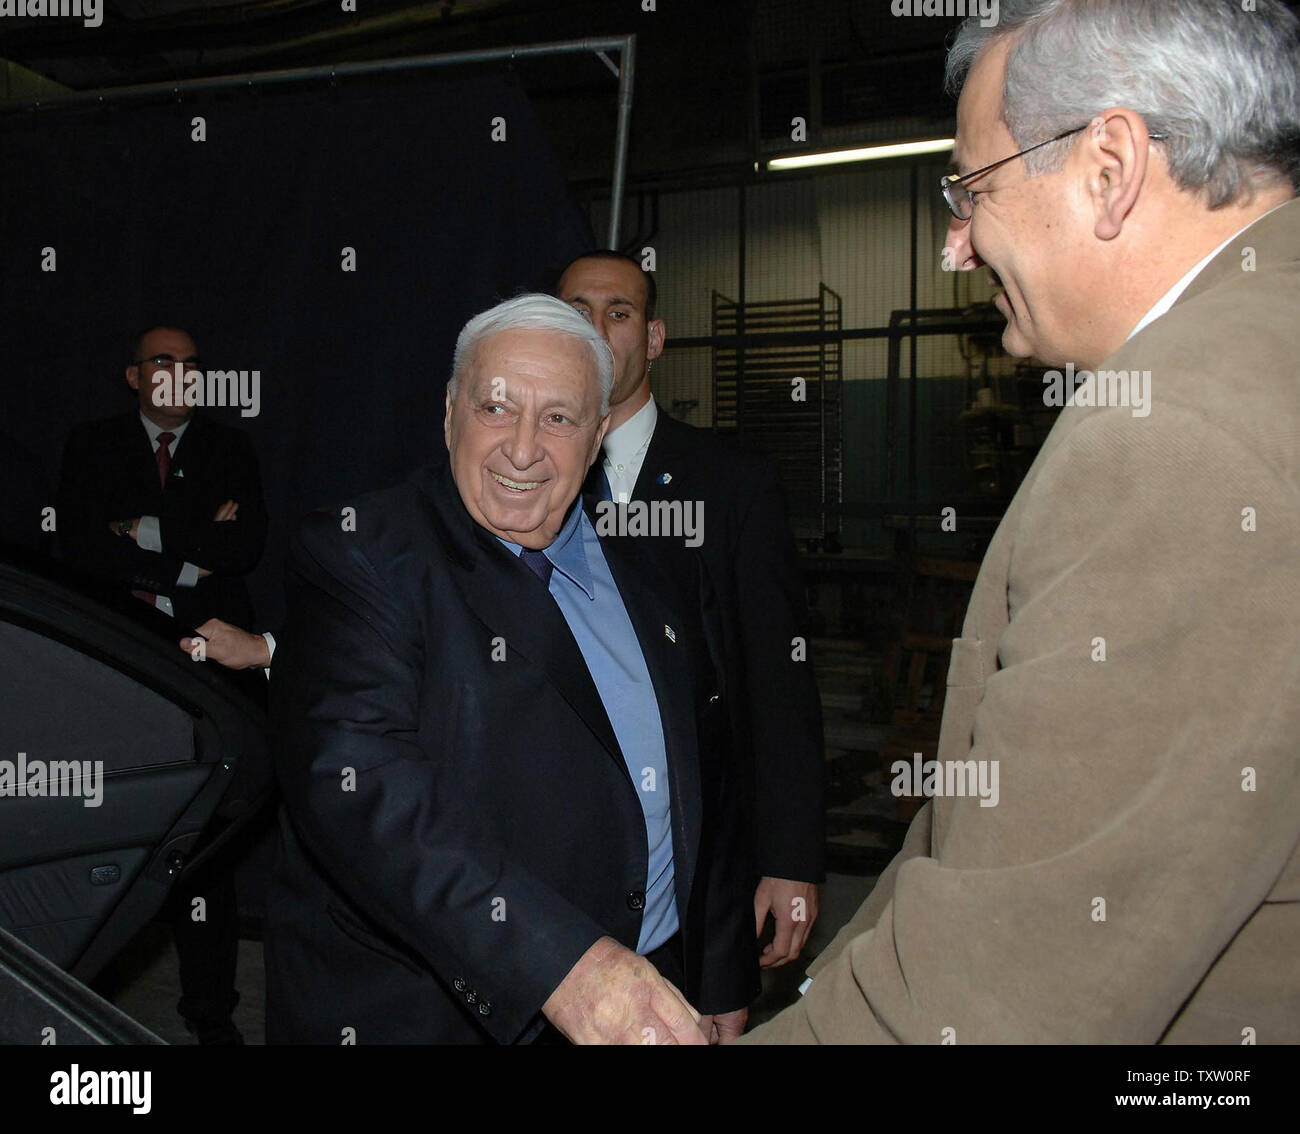 Israeli Prime Minister Ariel Sharon greets Professor Shlomo Mor Yosef, Director General of Hadassah University Medical Center  as he leaves Hadassah Hospital in Jerusalem, December 20, 2005. Prime Minister Sharon left the hospital after being treated for a mild stroke and said he is in a hurry to get back to work. (UPI Photo/ GPO Avi Ohayon) Stock Photo